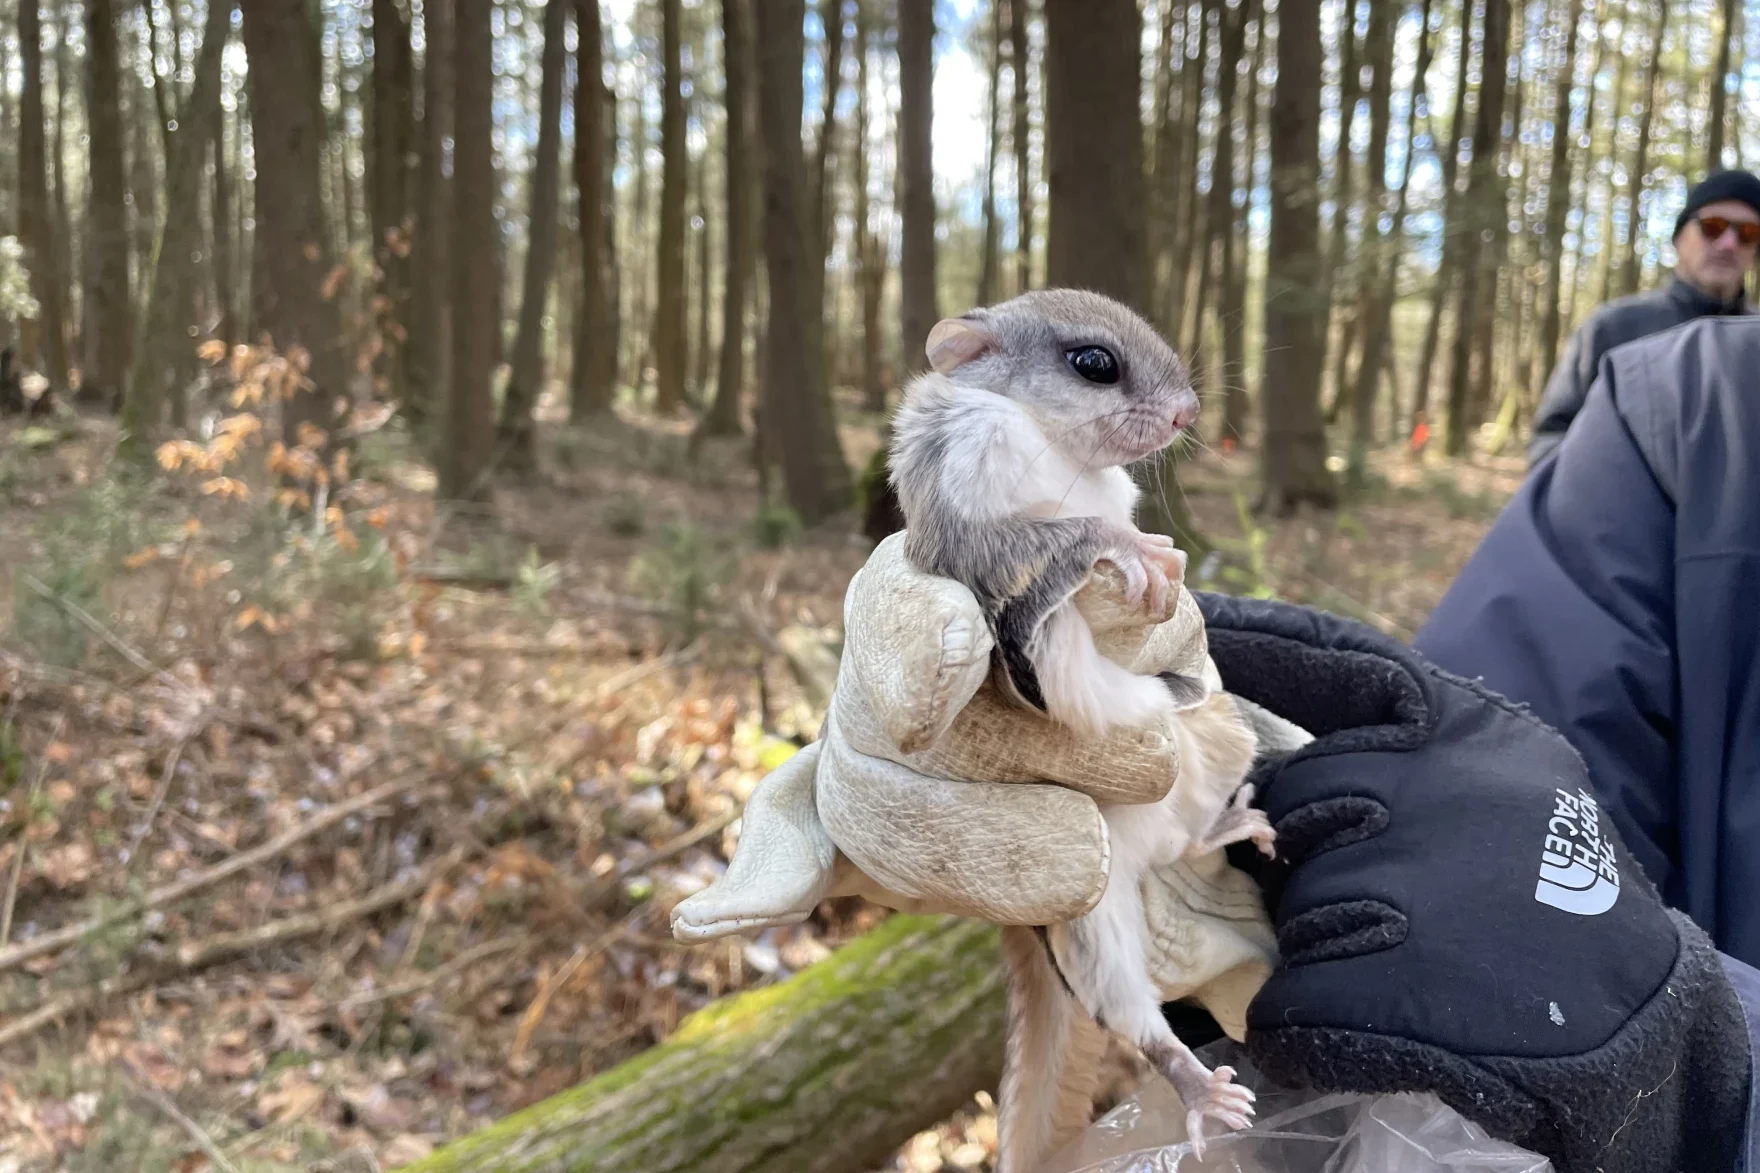 A gloved hand holds a small squirrel with big eyes wrapped in a cloth.